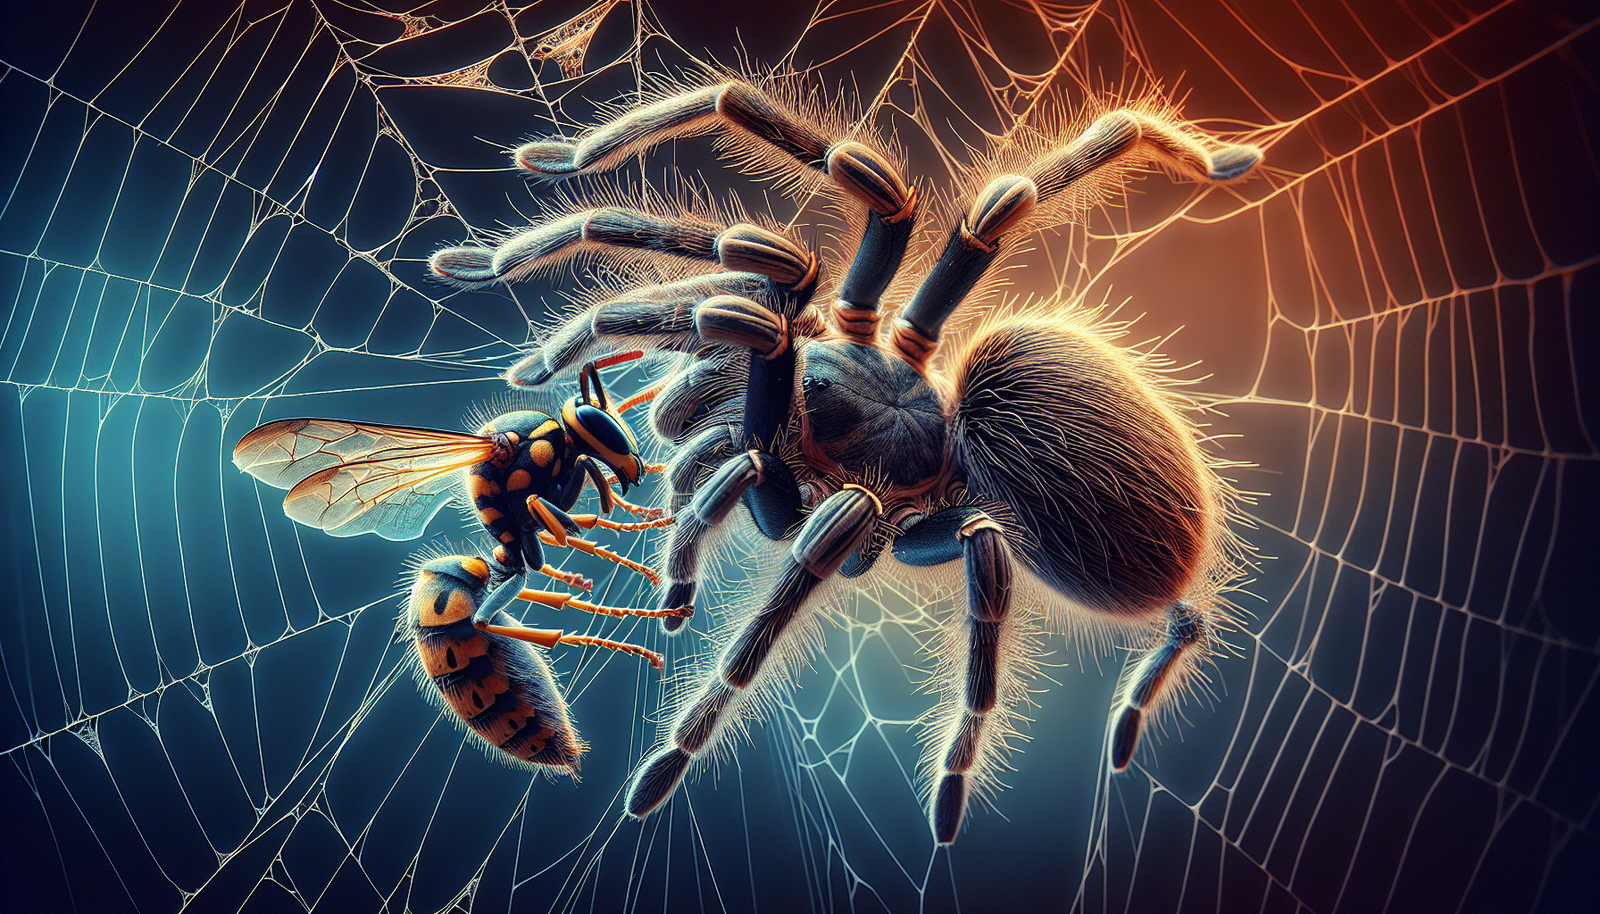 Are There Any Known Cases Of Tarantulas Falling Prey To Parasitic Wasps?